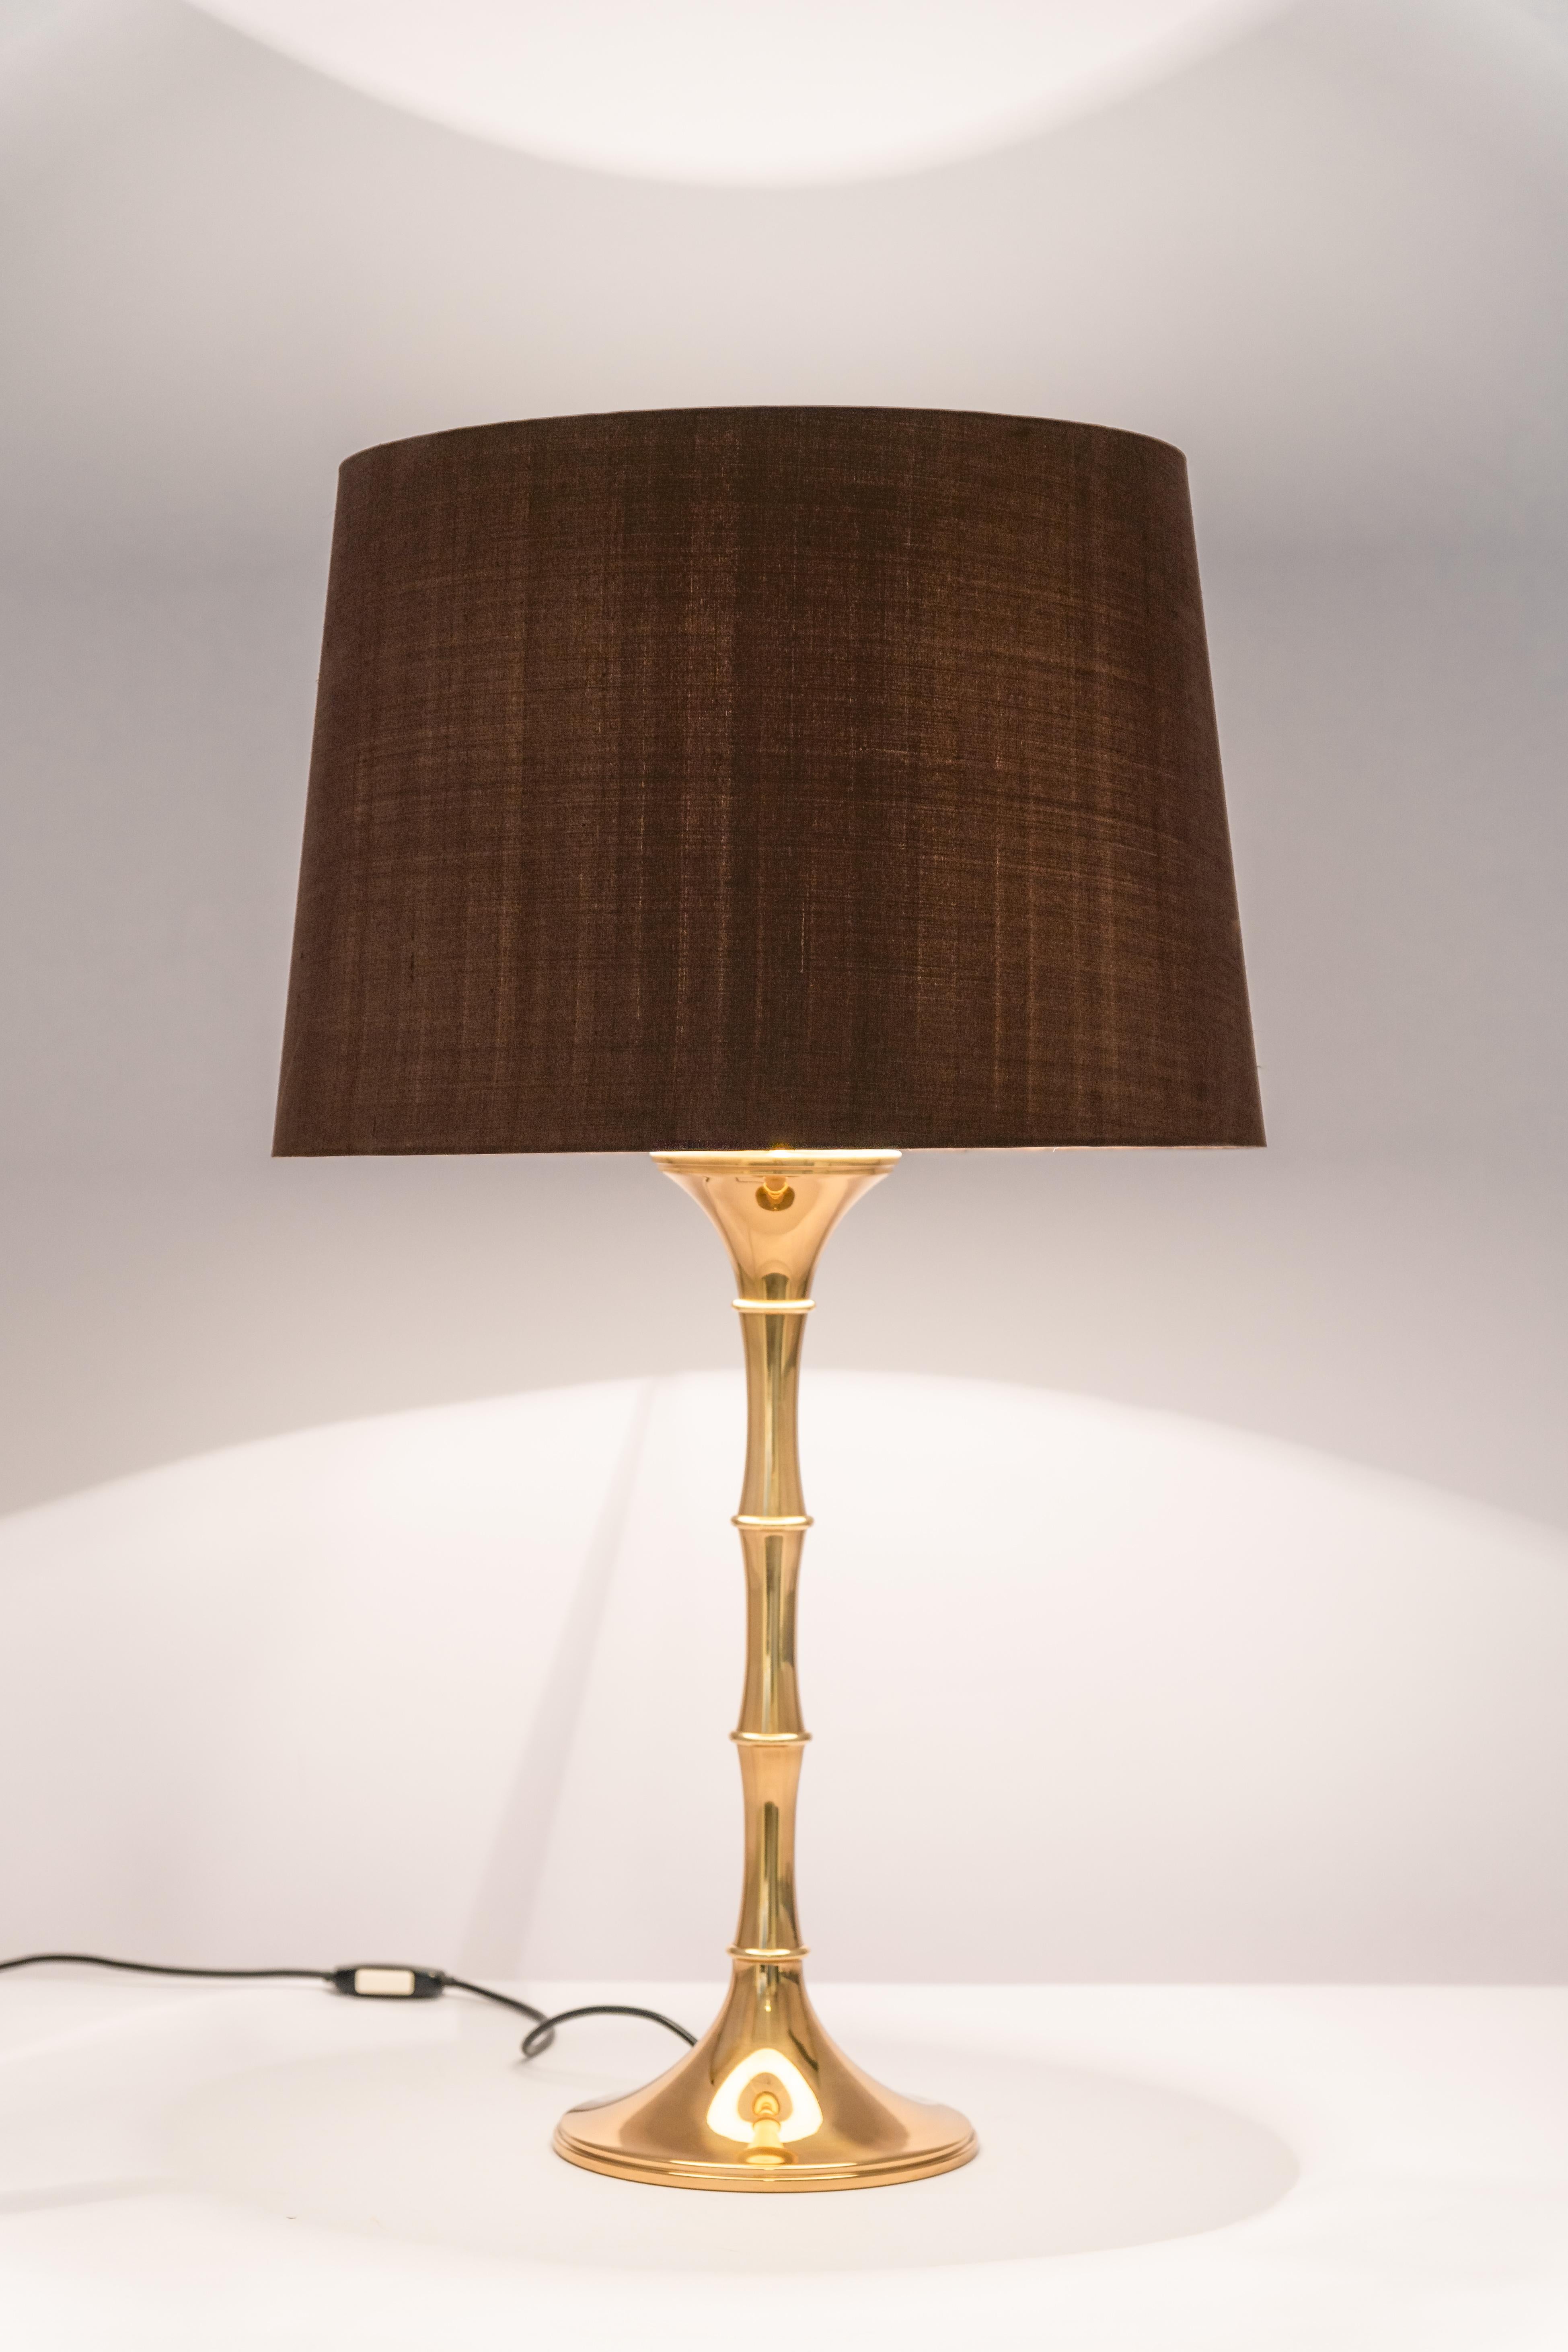 Pair of Bamboo Table Lamps by Ingo Maurer, Germany, 1970s For Sale 6